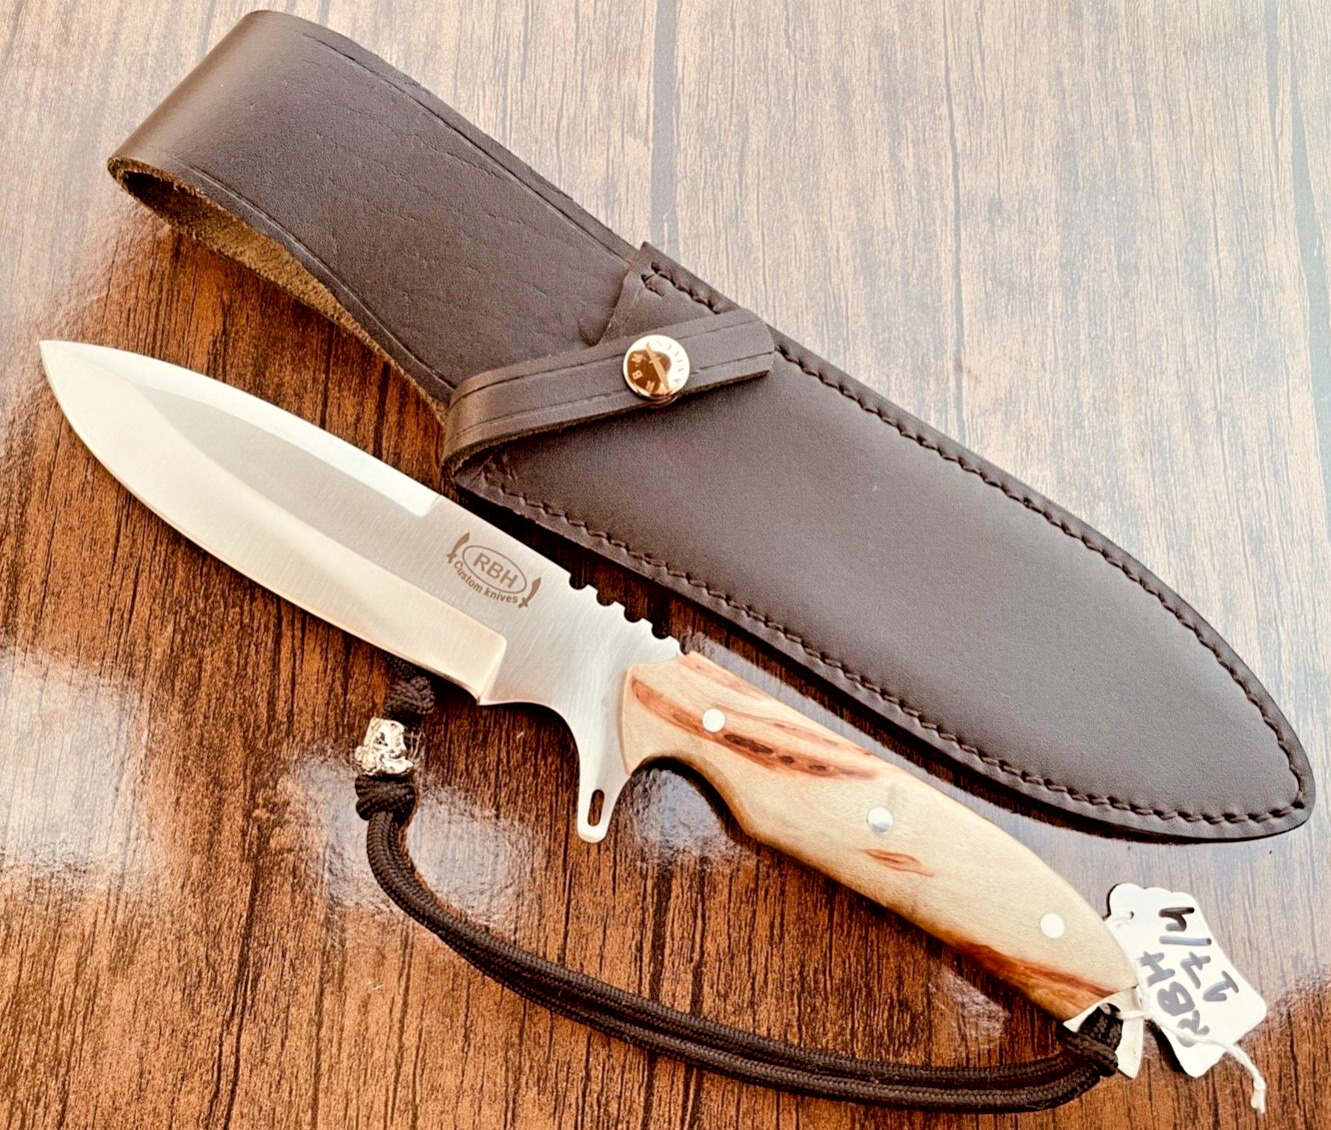 RBH CUSTOM HAND MADE FIGHTER BOWIE KNIFE FIRE WOOD HANDLE & SHEATH, #RBH-17/4(4)